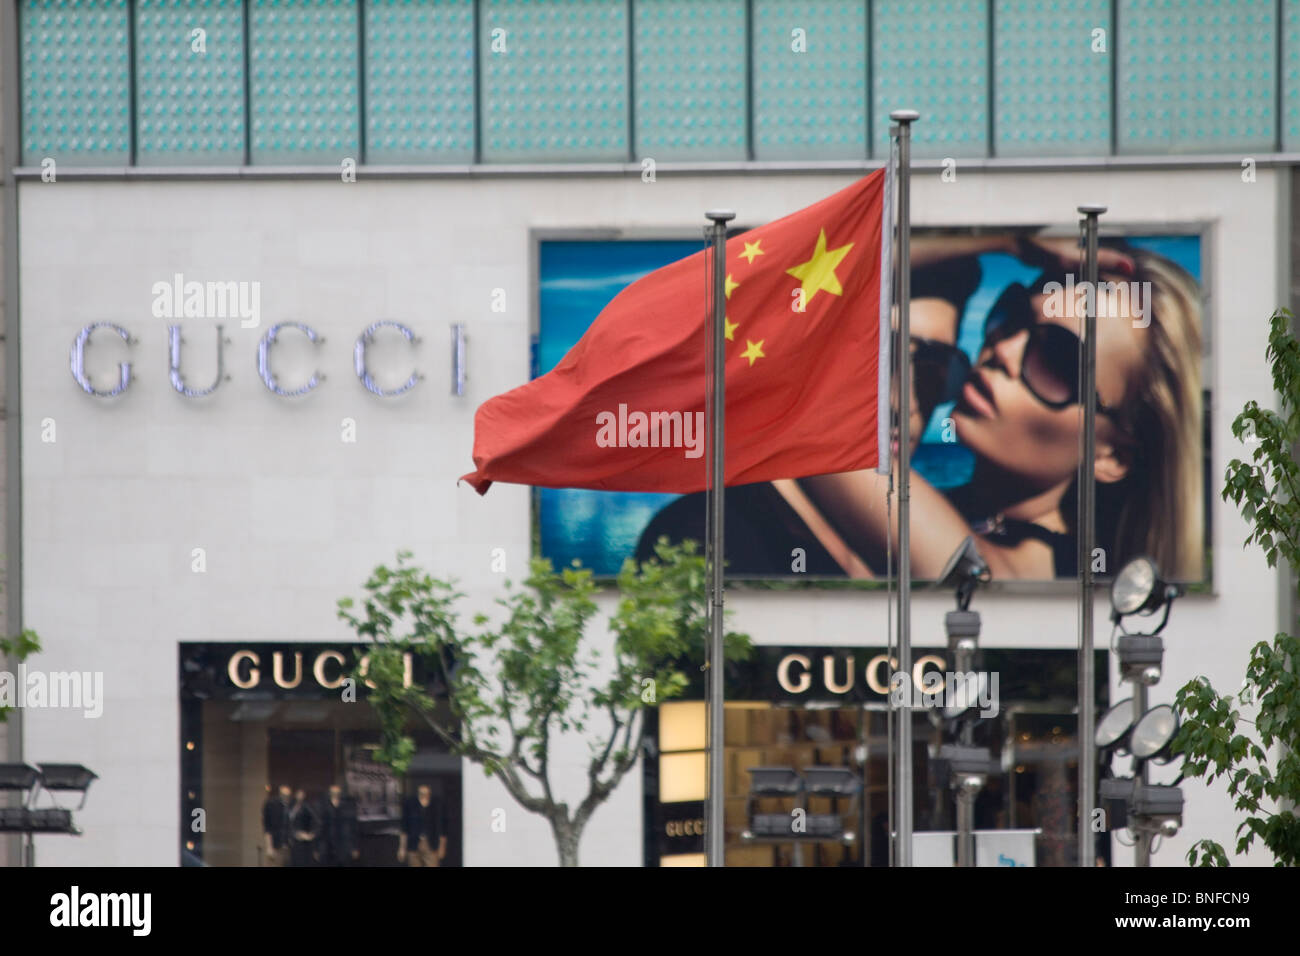 Chinese communist flag flutters in front of Gucci shop, Shanghai, China  Stock Photo - Alamy